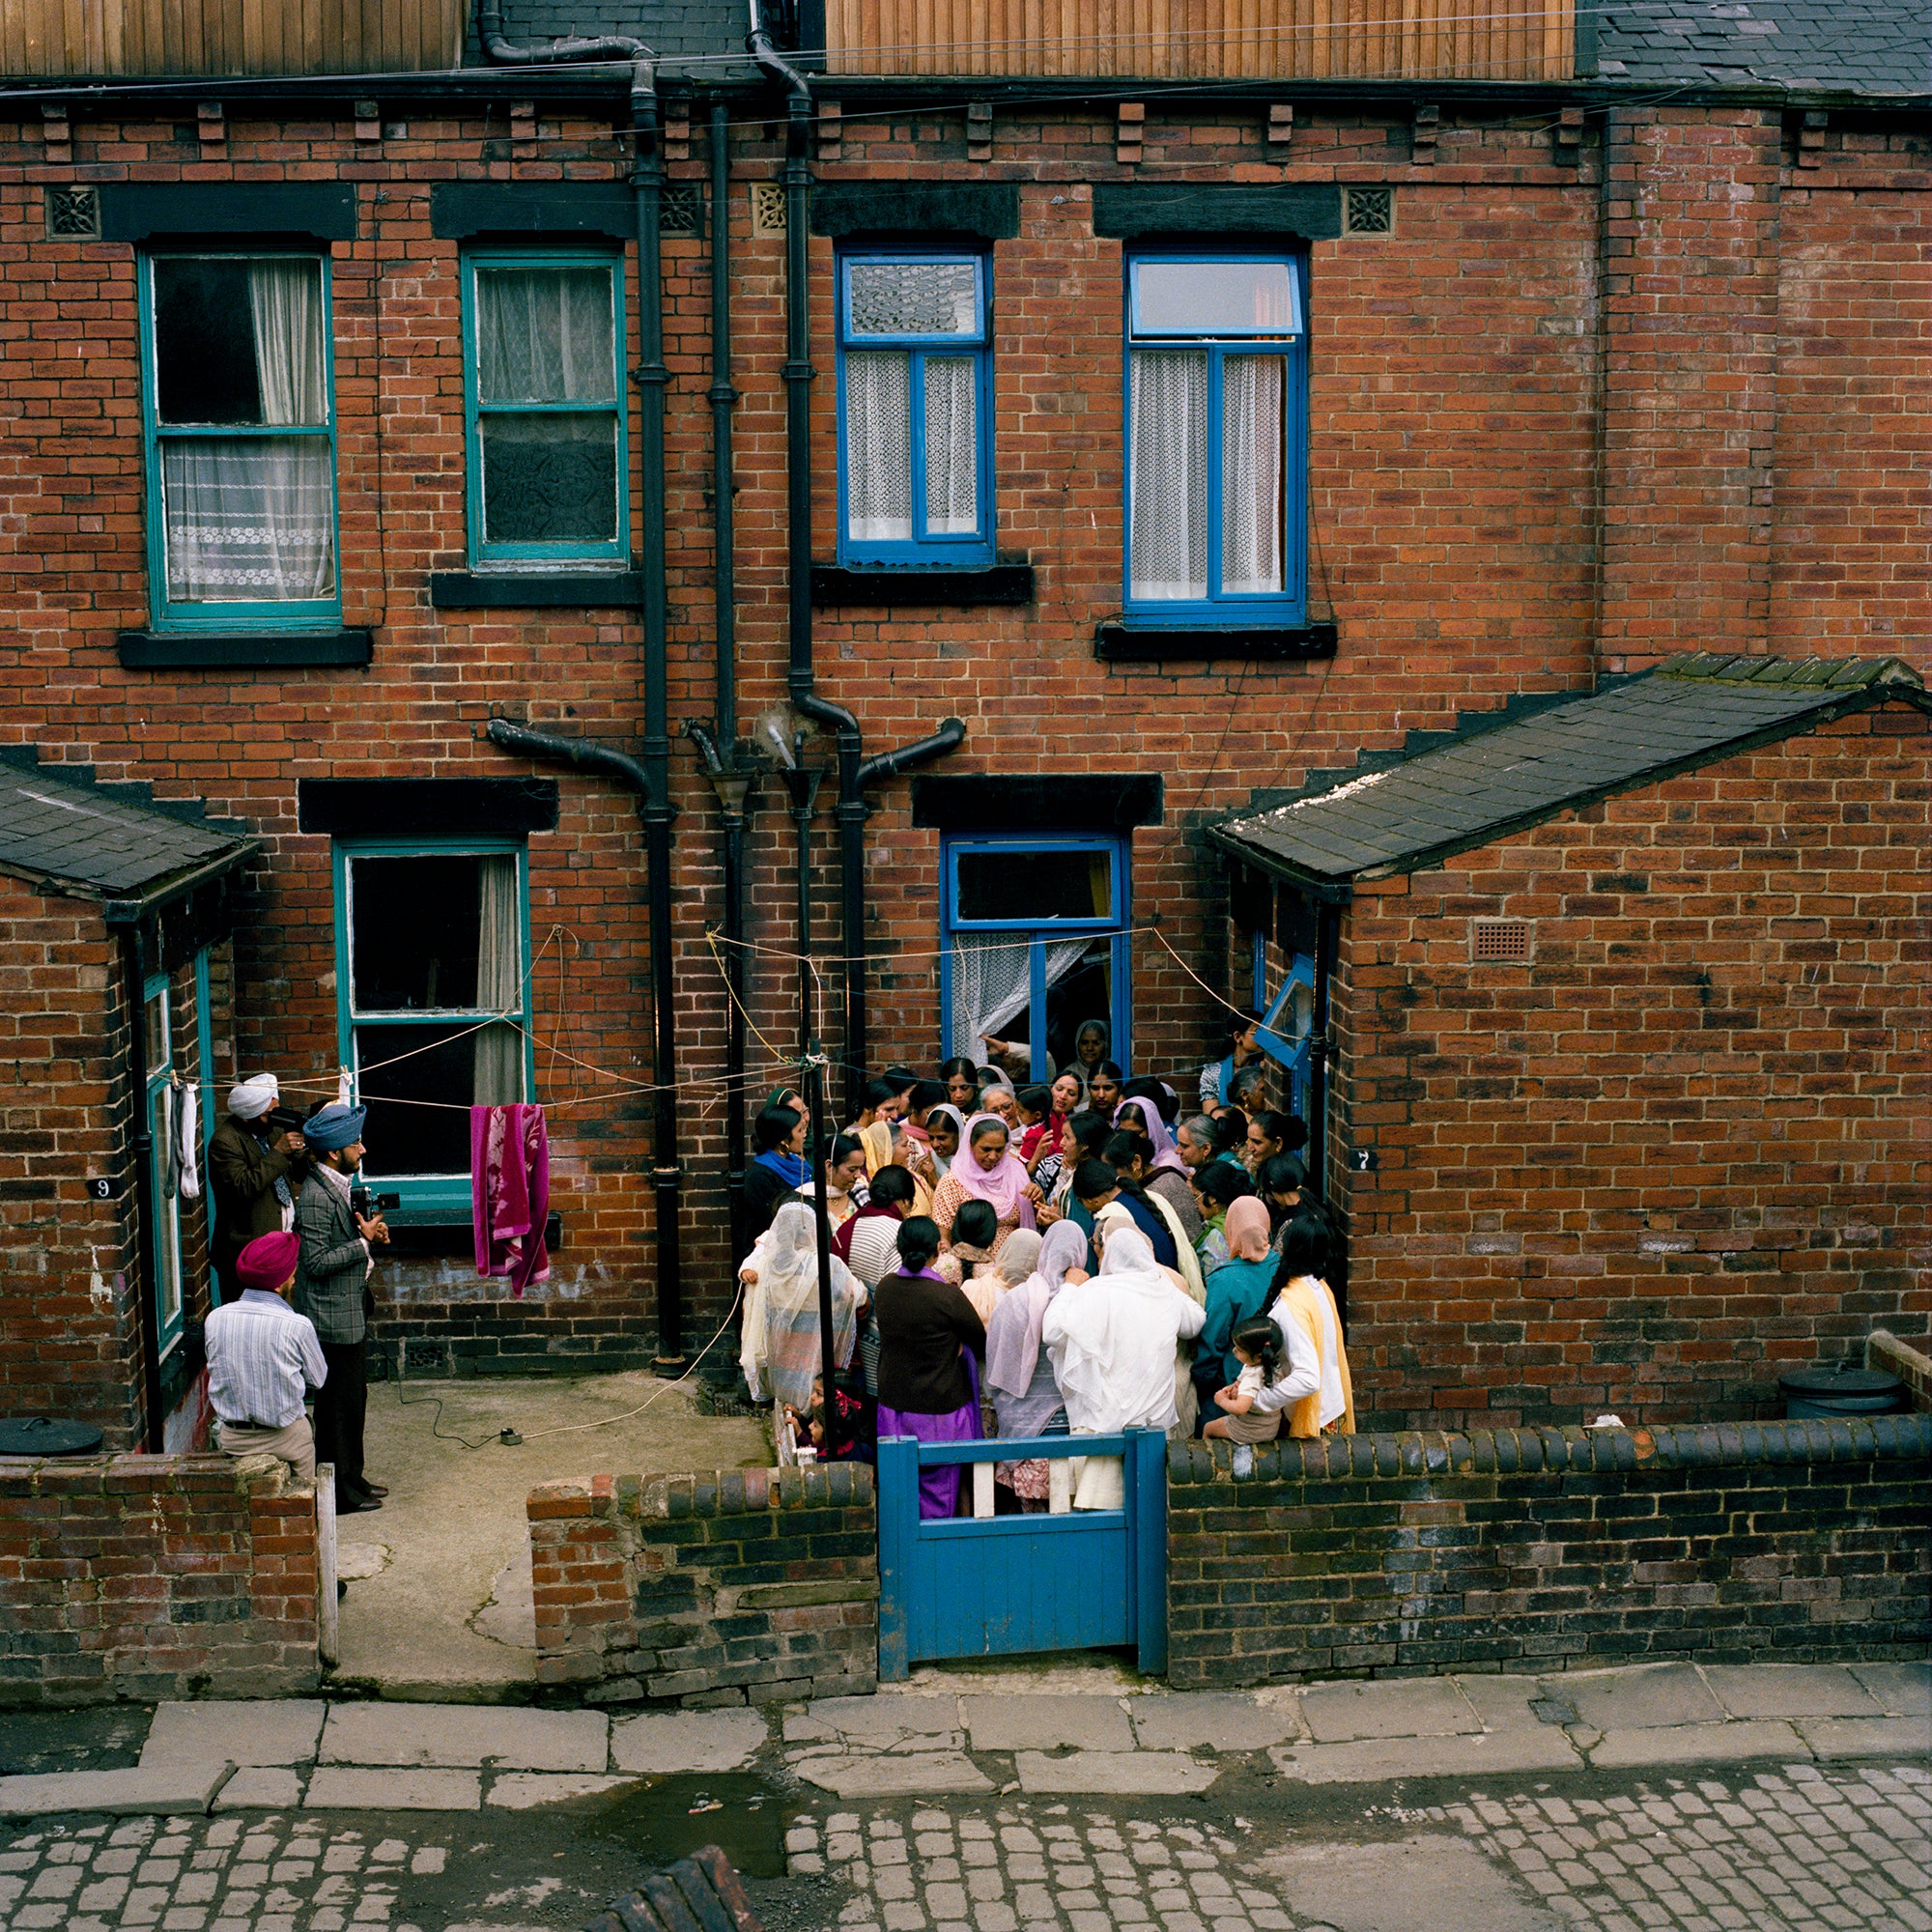 'How Many Aunties?', Back Hares Mount, Leeds, 1978